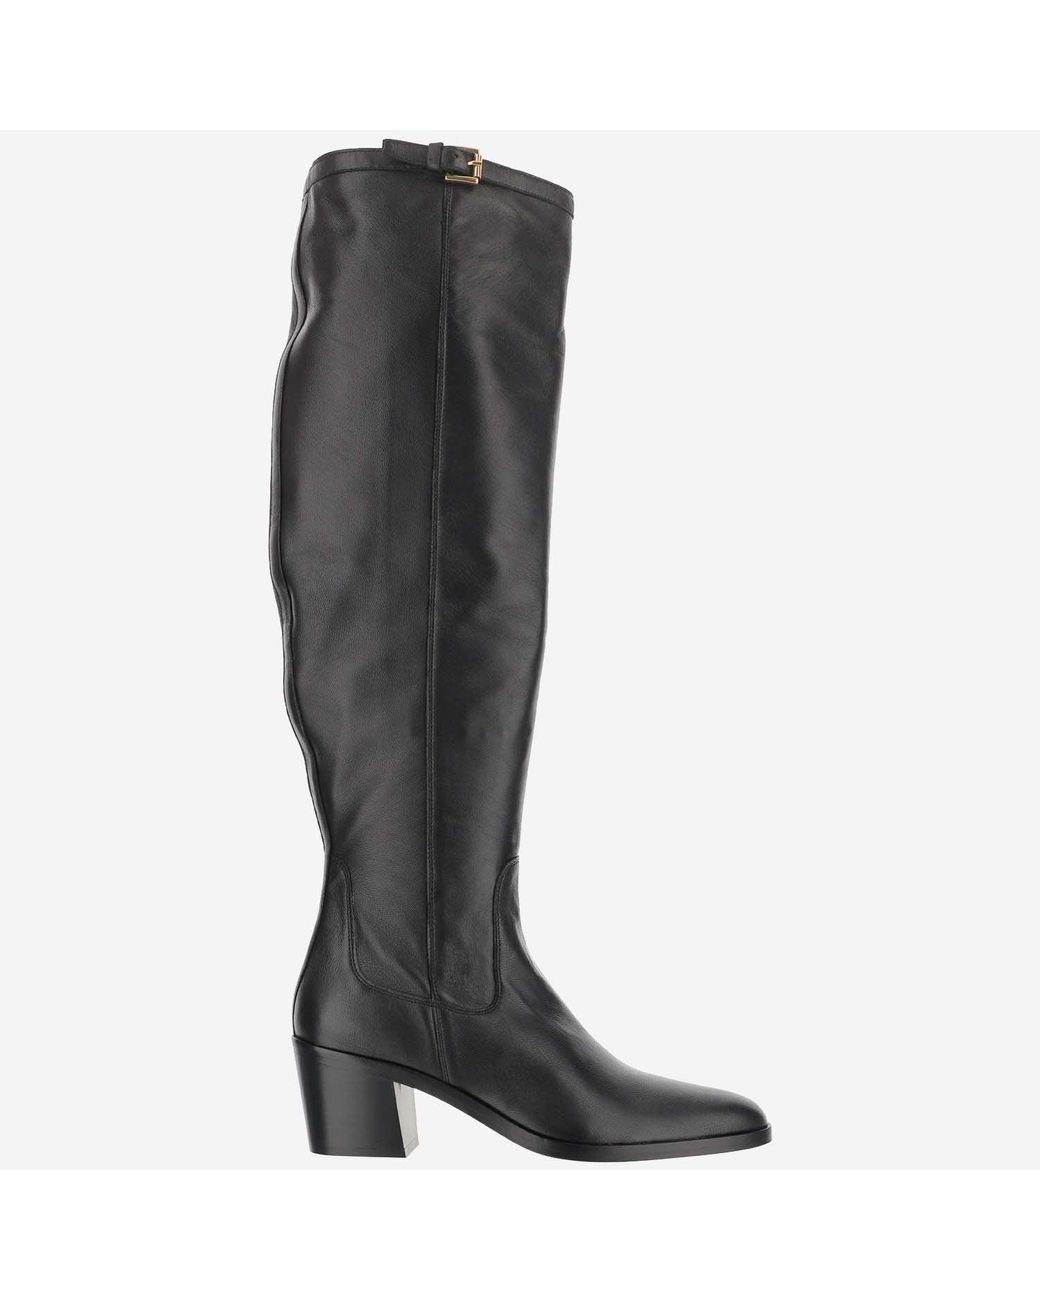 BY FAR Leather Boots in Nero (Black) | Lyst